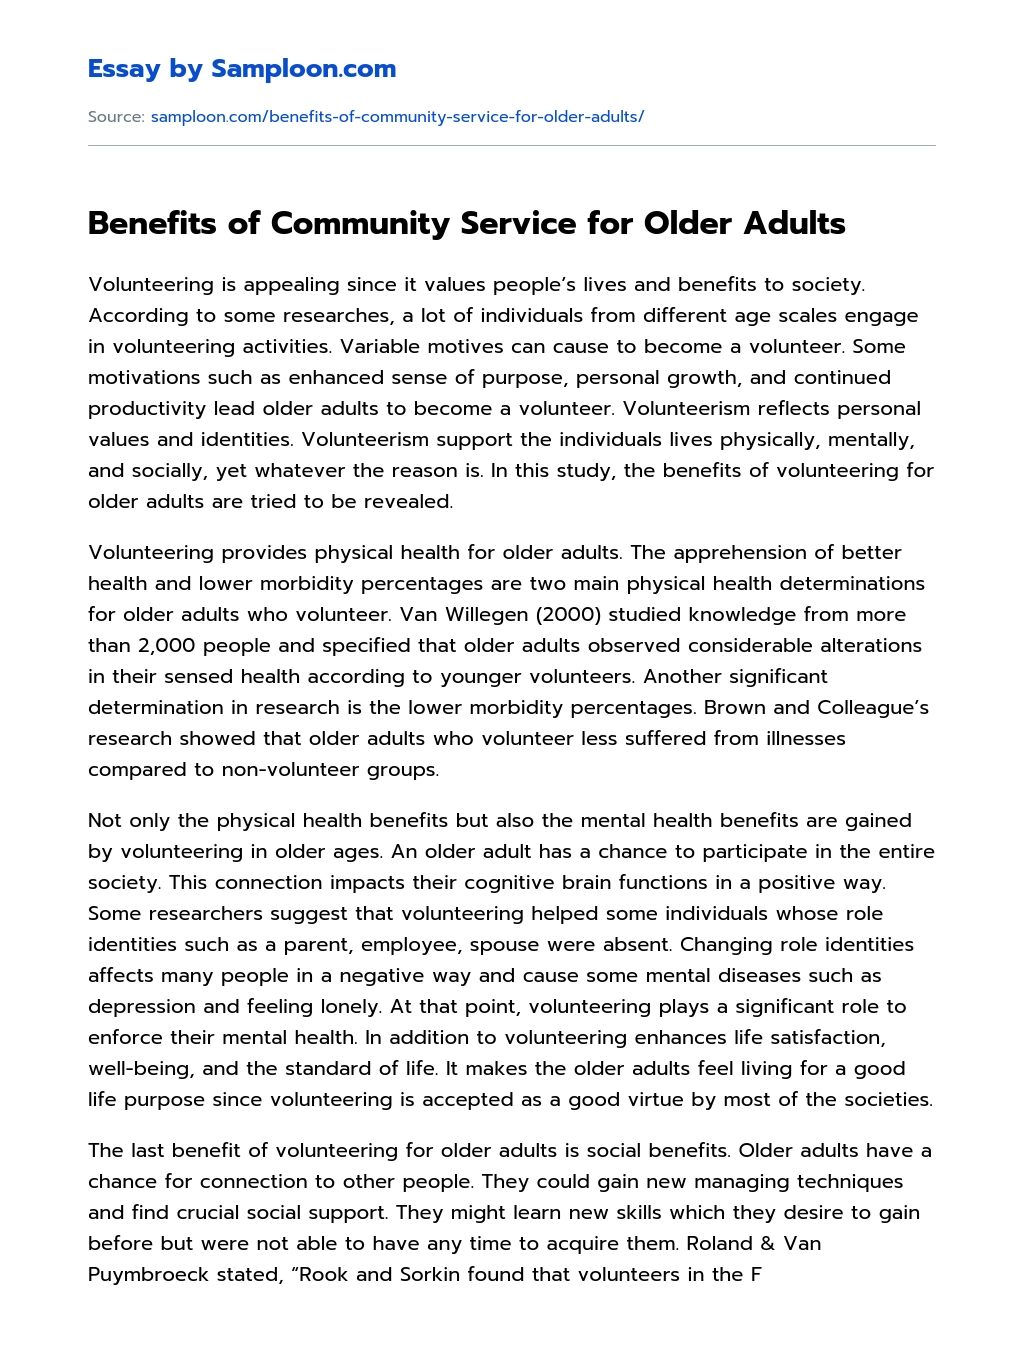 Benefits of Community Service for Older Adults essay